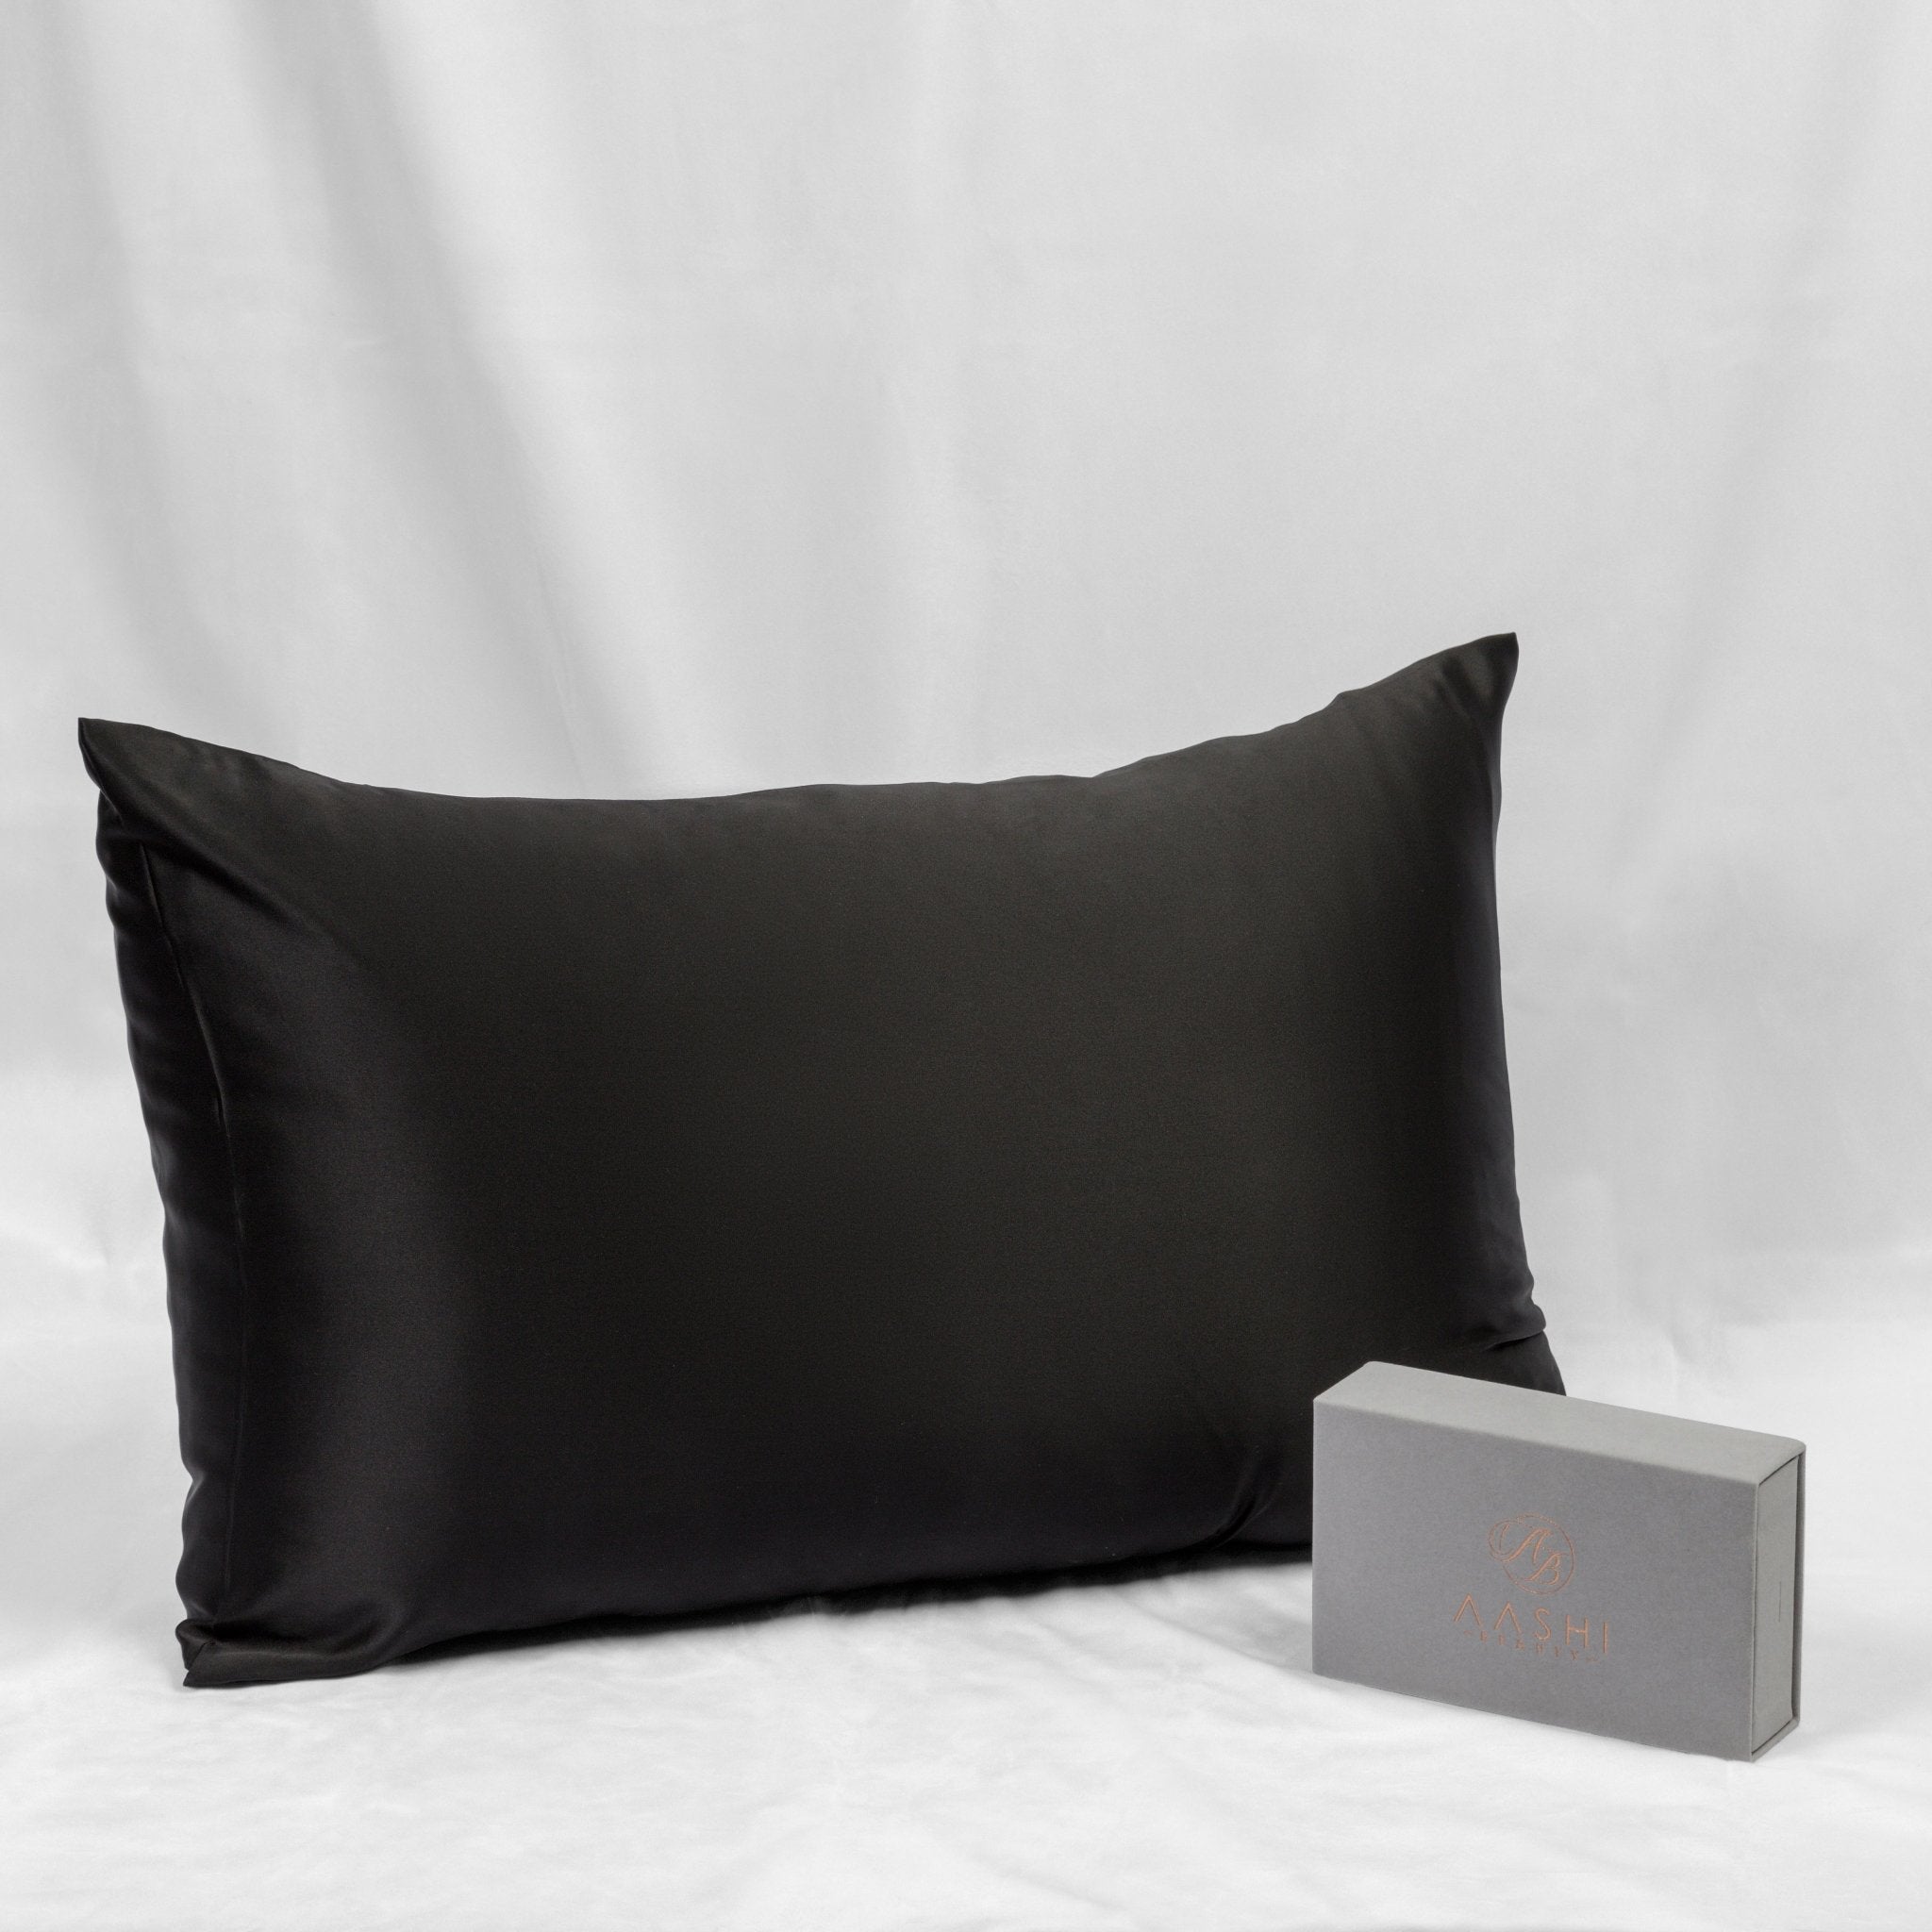 100% Pure Charmeuse Silk Pillowcase - made in Canada (Queen Size) Choose Colour/ Custom Colours - Aashi Beauty